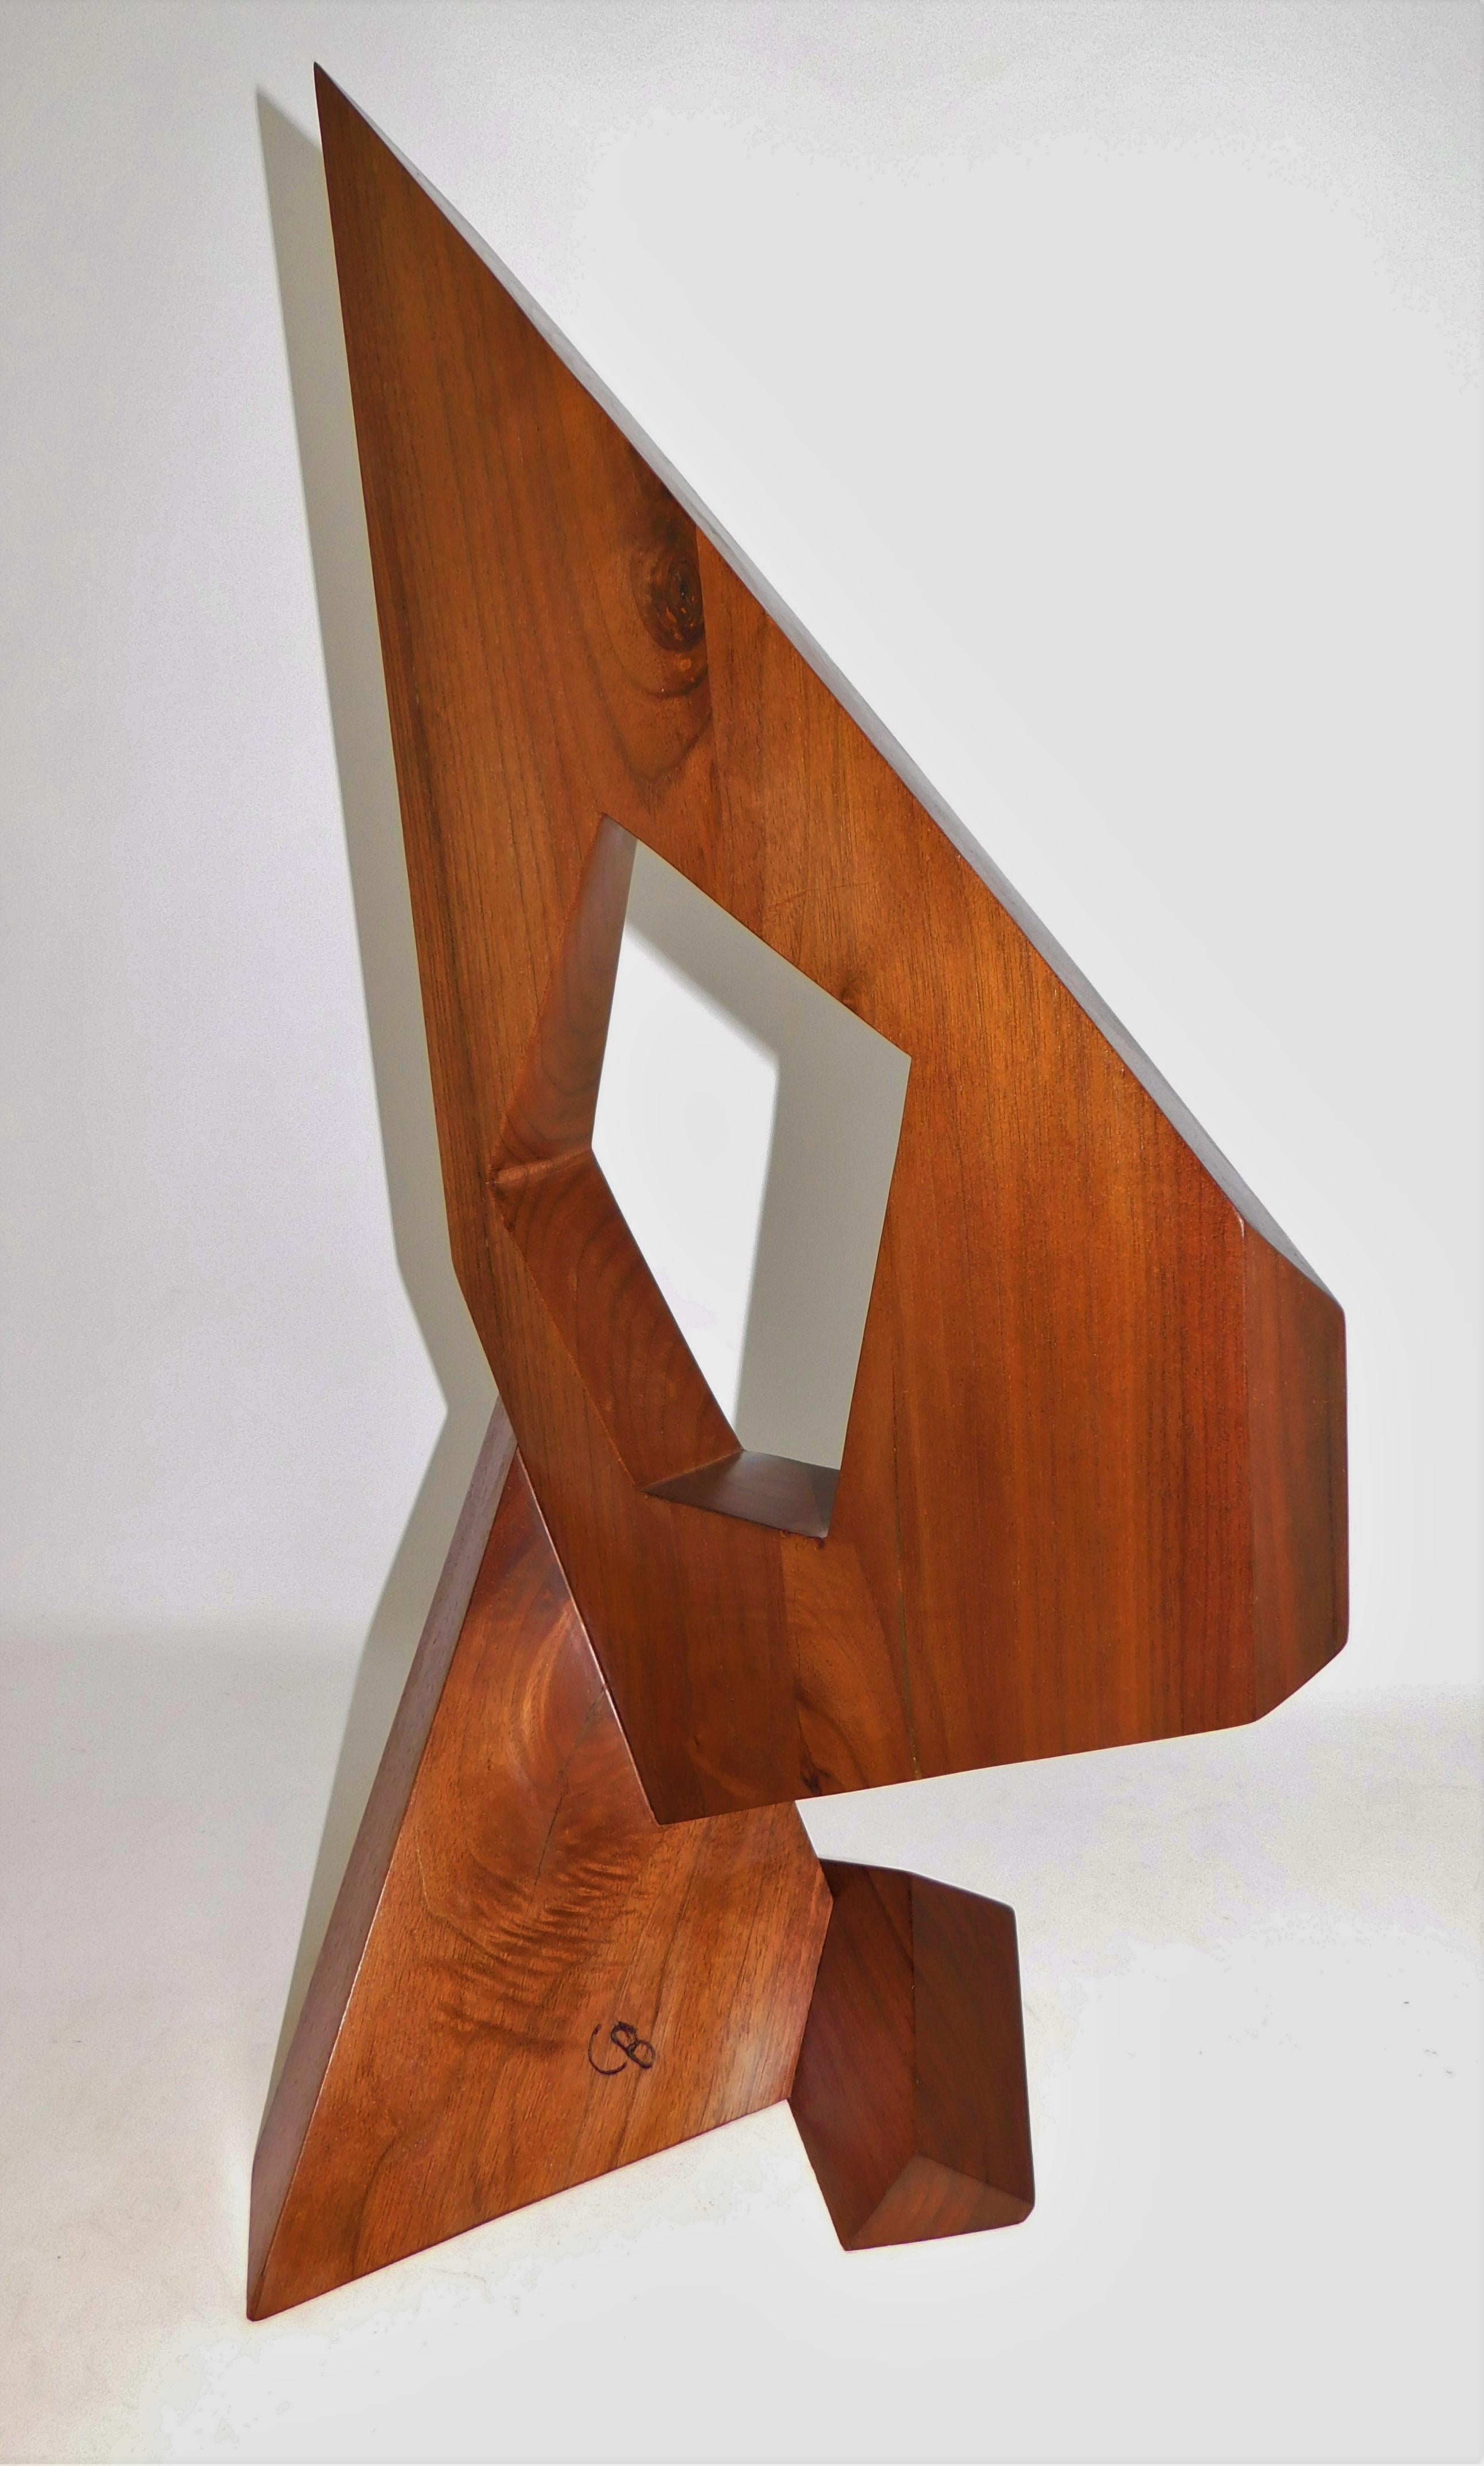 Hand-Crafted Czeslaw Budny Large Modern Abstract Constructivist Walnut Wood Sculpture Signed